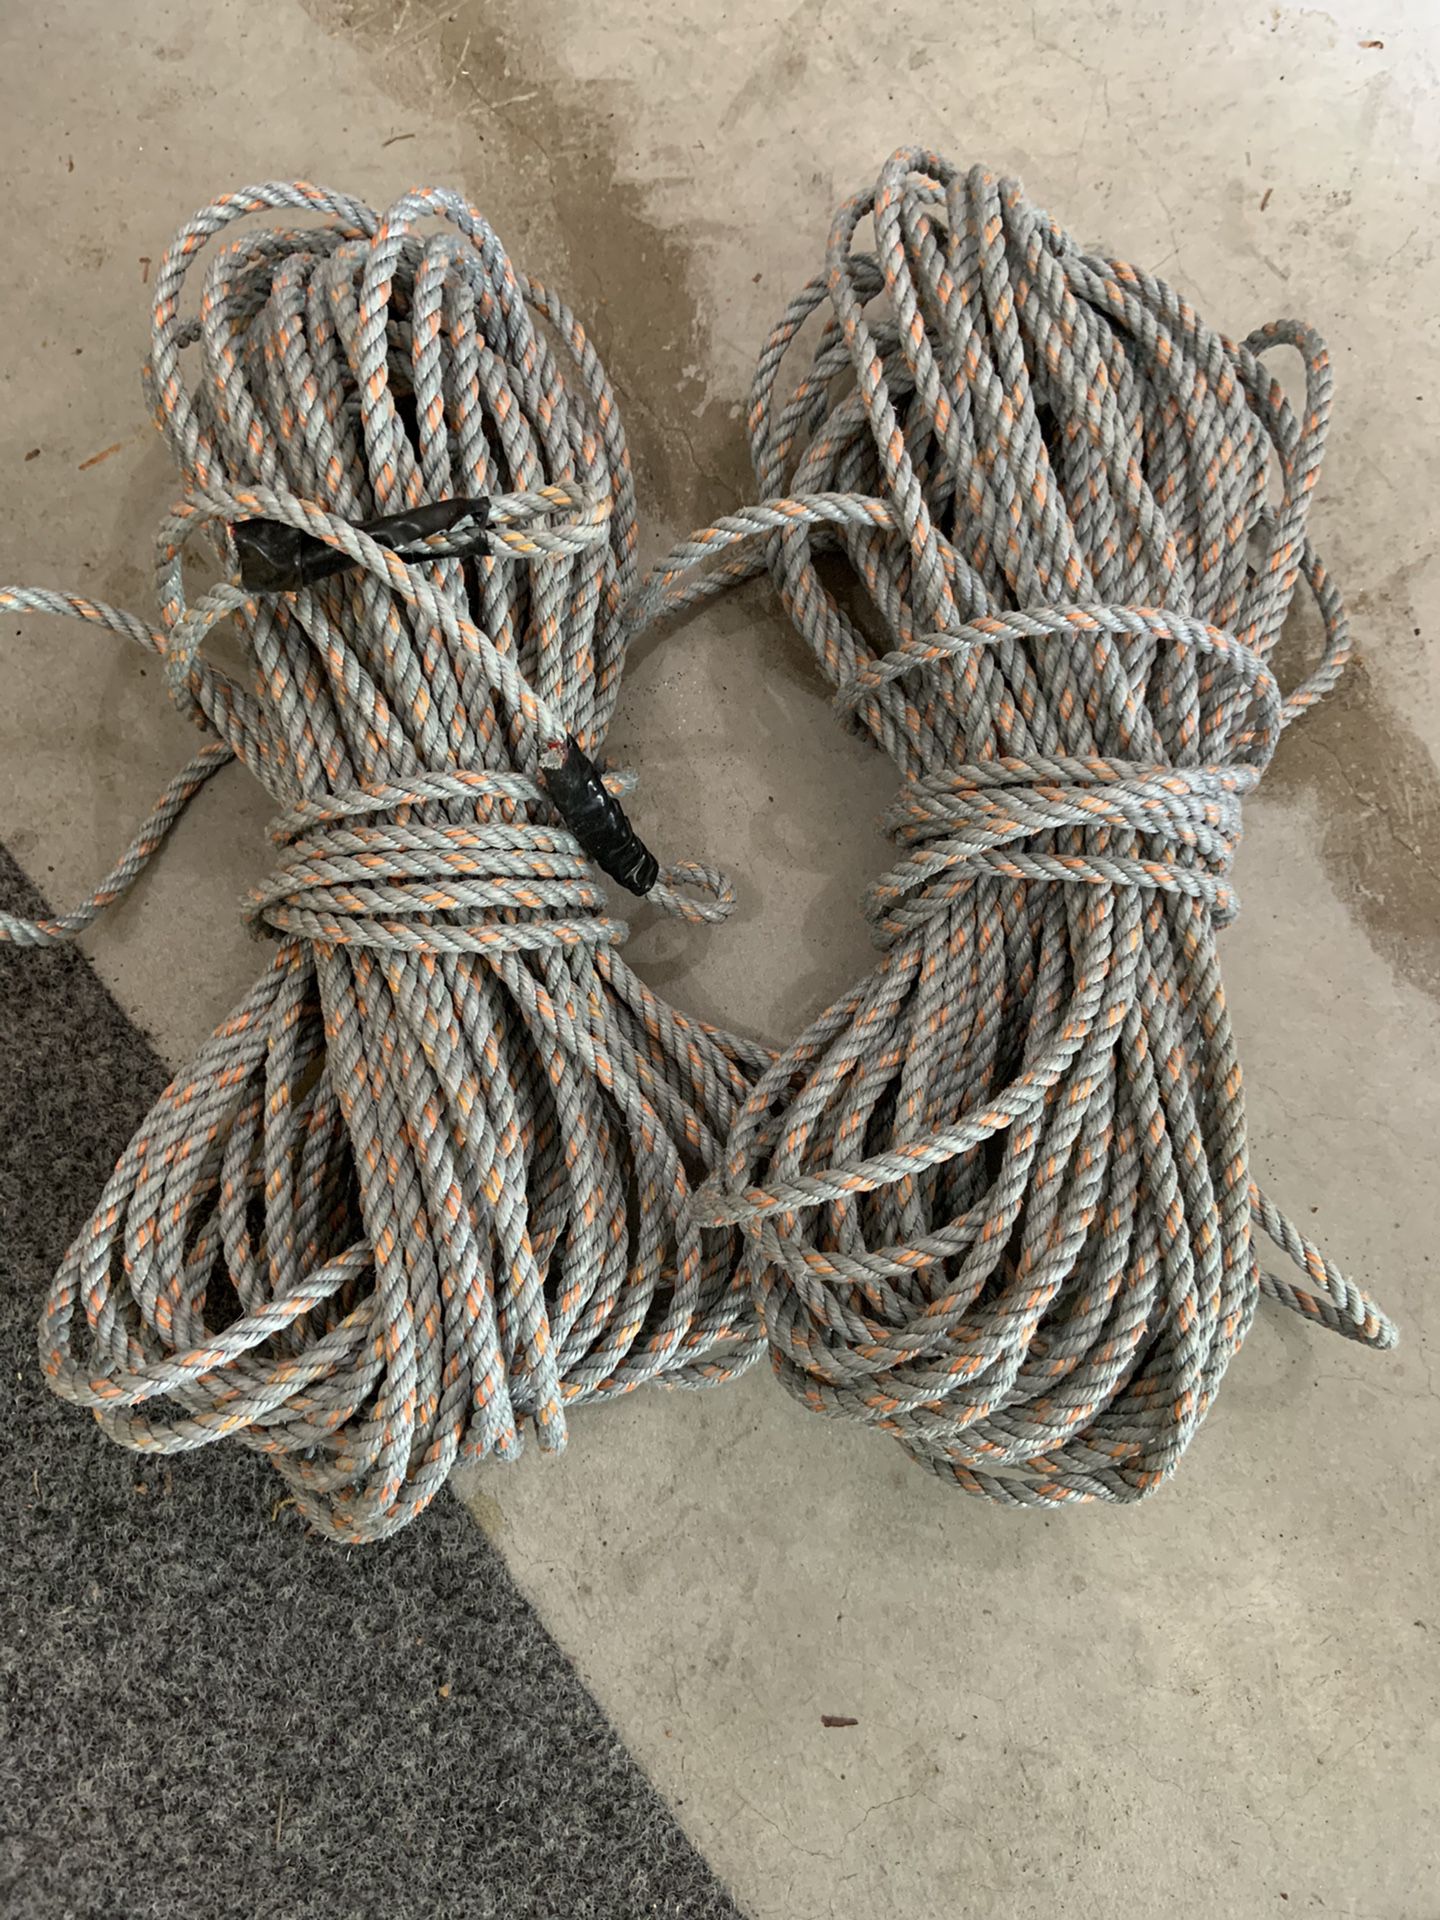 100 ft of lead rope